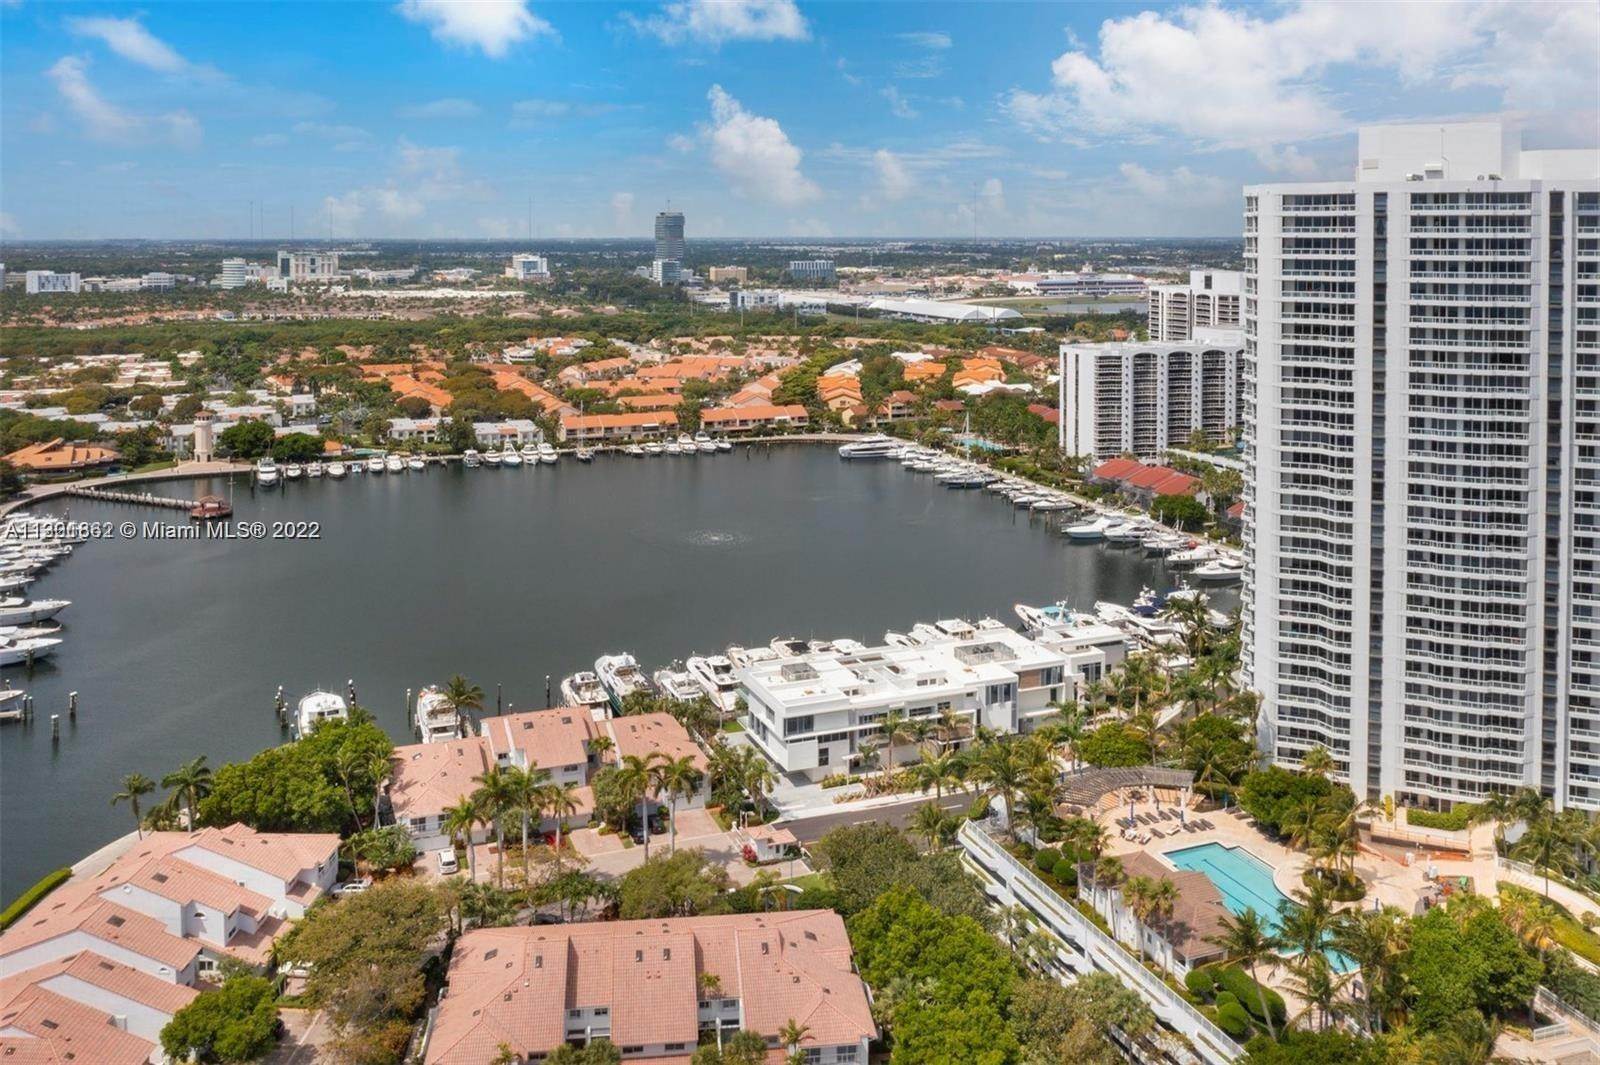 6. Land for Sale at Aventura, FL 33180